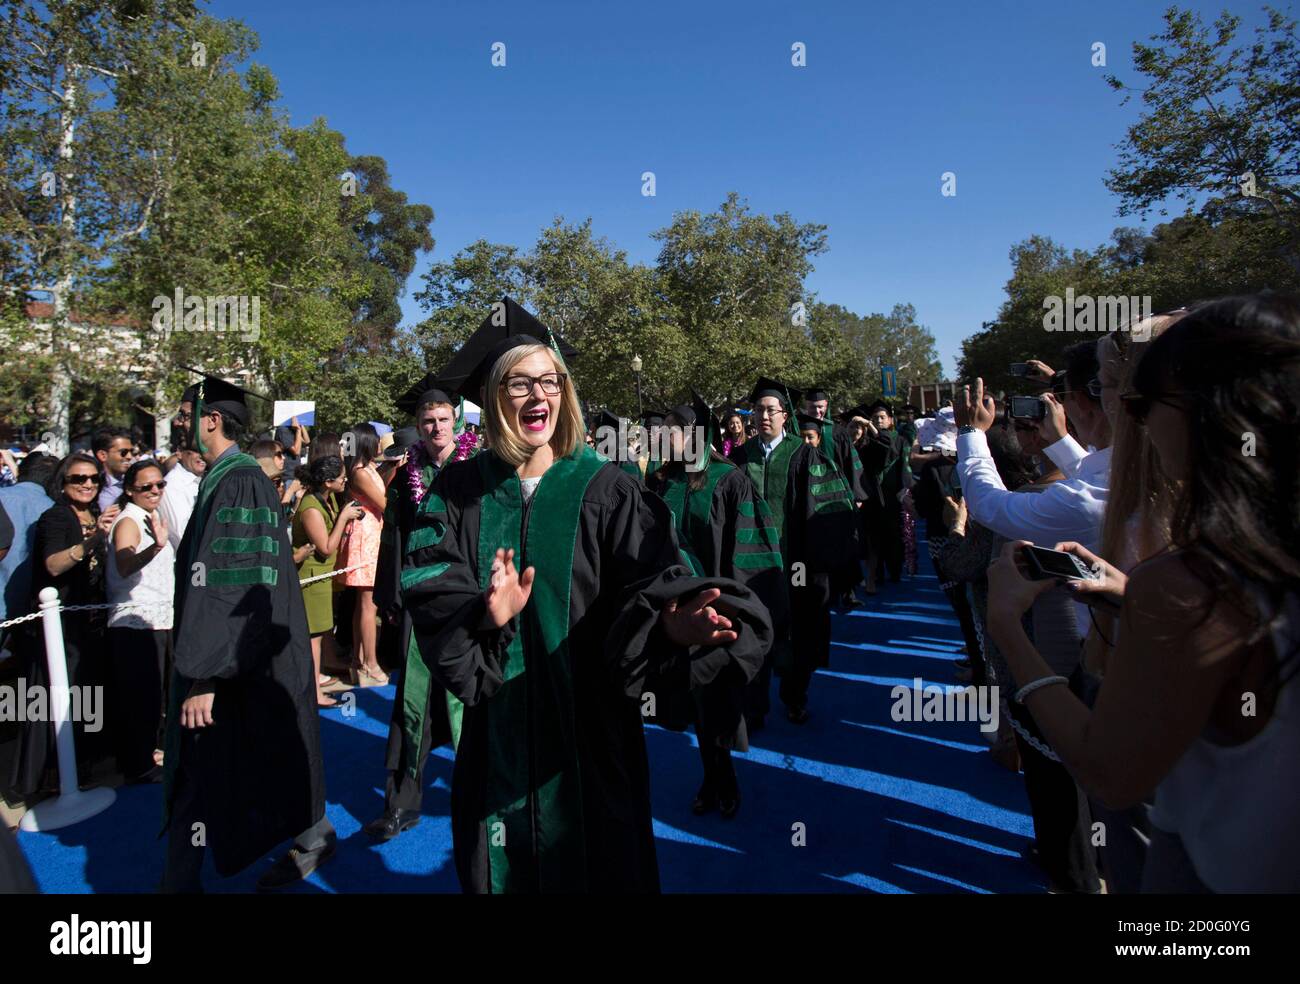 Graduates attend the David Geffen School of Medicine at UCLA's Hippocratic Oath Ceremony in Los Angeles, California May 30, 2014.  REUTERS/Mario Anzuoni  (UNITED STATES - Tags: HEALTH EDUCATION SOCIETY) Stock Photo